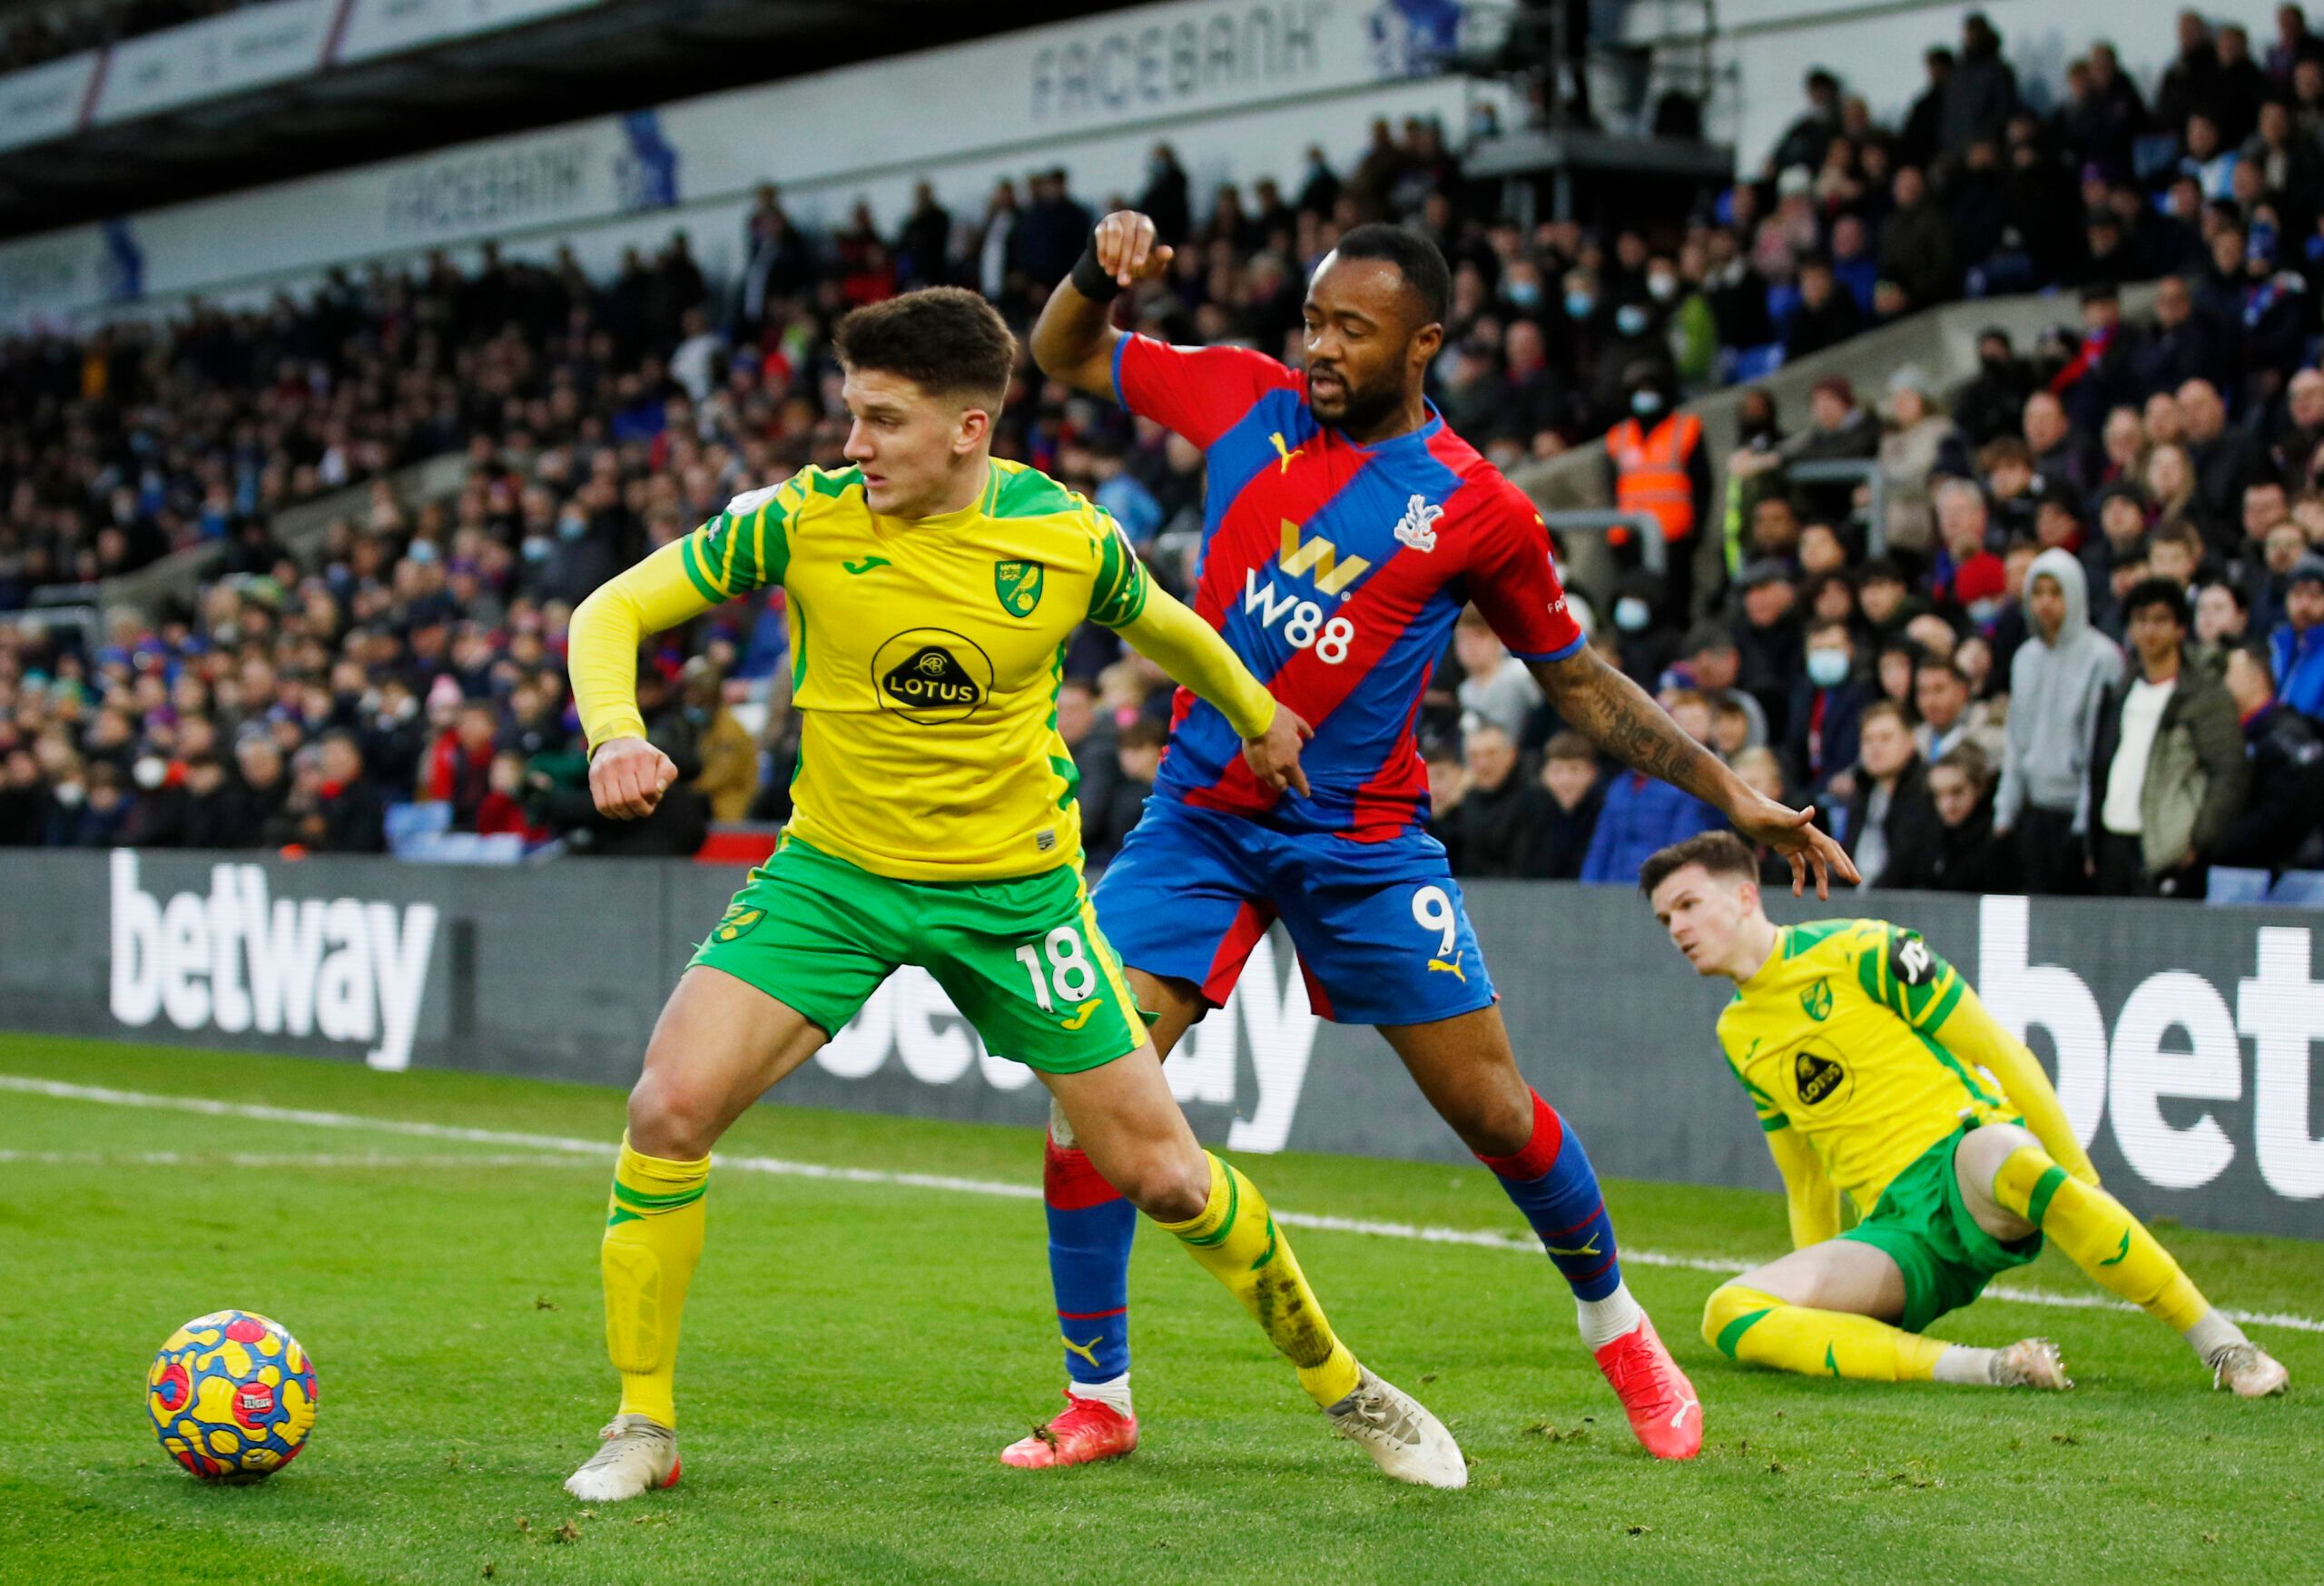 Soccer Football - Premier League - Crystal Palace v Norwich City - Selhurst Park, London, Britain - December 28, 2021 Norwich City's Christos Tzolis in action with Crystal Palace's Jordan Ayew Action Images via Reuters/Andrew Boyers EDITORIAL USE ONLY. No use with unauthorized audio, video, data, fixture lists, club/league logos or 'live' services. Online in-match use limited to 75 images, no video emulation. No use in betting, games or single club /league/player publications.  Please contact yo